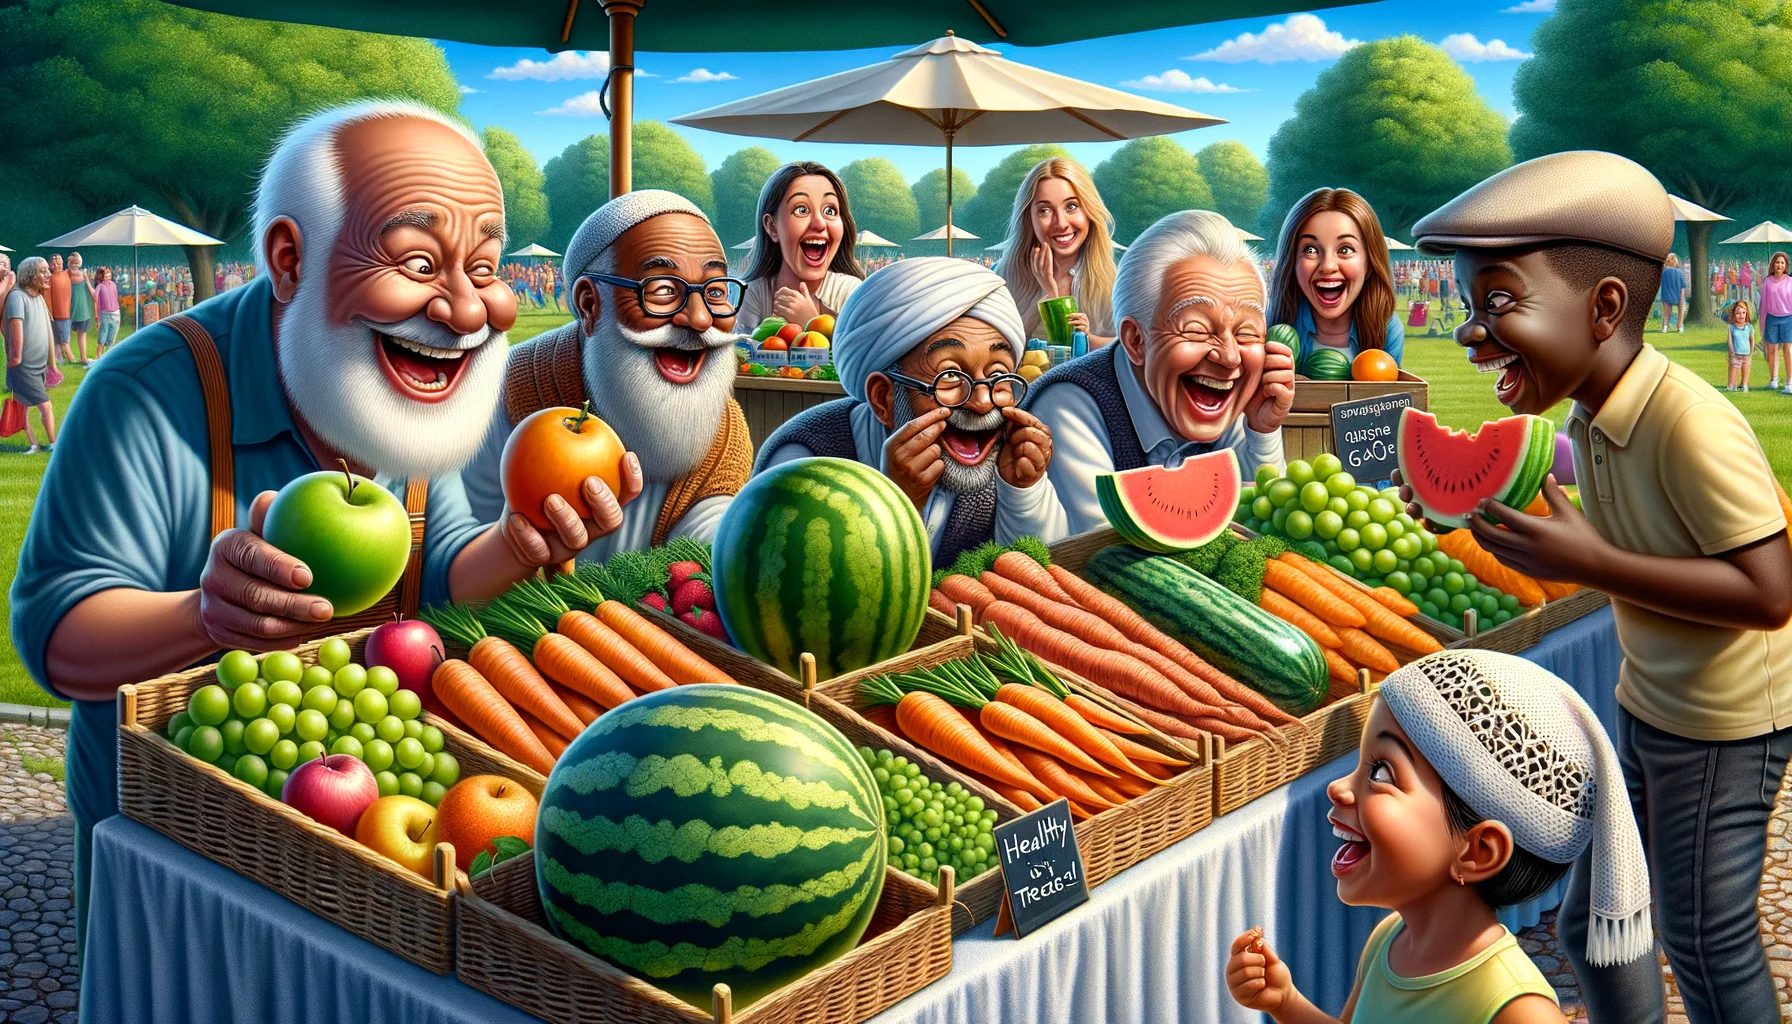 Create a humorously realistic scene embodying the concept of 'Healthy Treats' at its best. Picture a vibrant and inviting farmer's market set up in a picturesque park on a sunny day. In the foreground, there's a stand labelled 'Healthy Treats' displaying a colourful array of fresh fruits and vegetables, all artfully arranged. Meanwhile, an elderly man with jolly expressions is humorously eyeing a watermelon as though it's a gourmet delight, while a young Caucasian girl is happily chomping on a large, crunchy carrot. At the same table, a Black woman with a friendly smile is serving a Middle-Eastern boy an apple, while a Hispanic vendor nearby is arranging a fresh bunch of grapes. The entire scene radiates good humor and the joy of healthy eating.